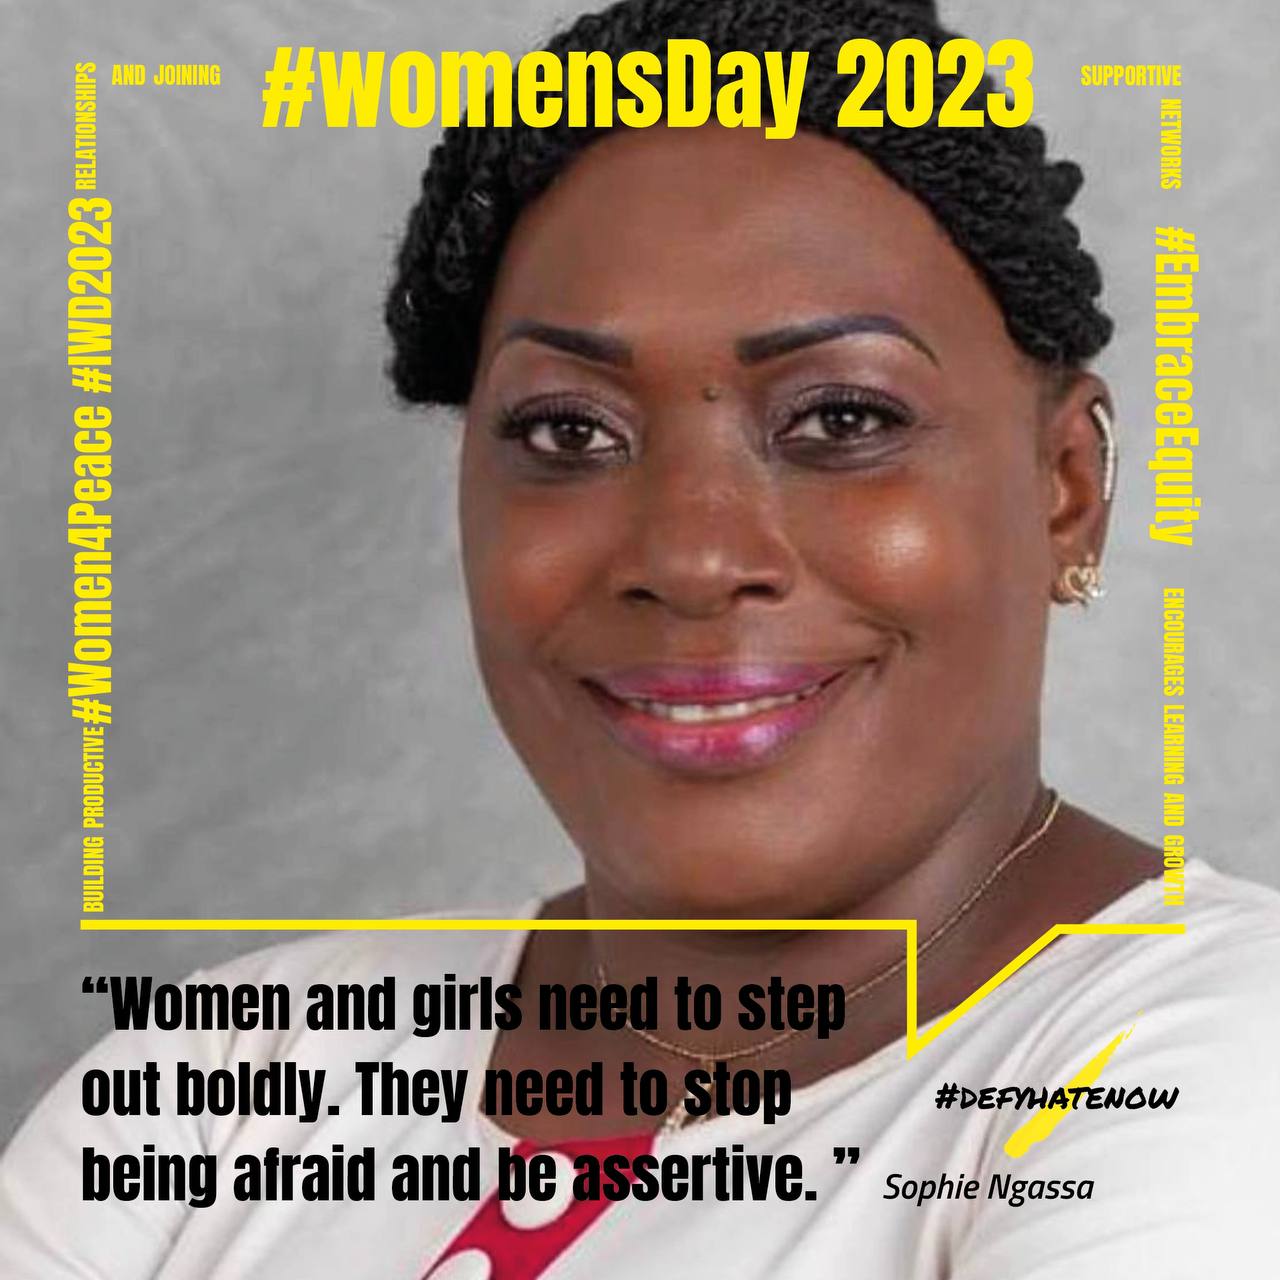 Sophie Ngassa on the role of women in peace processes. - #defyhatenow